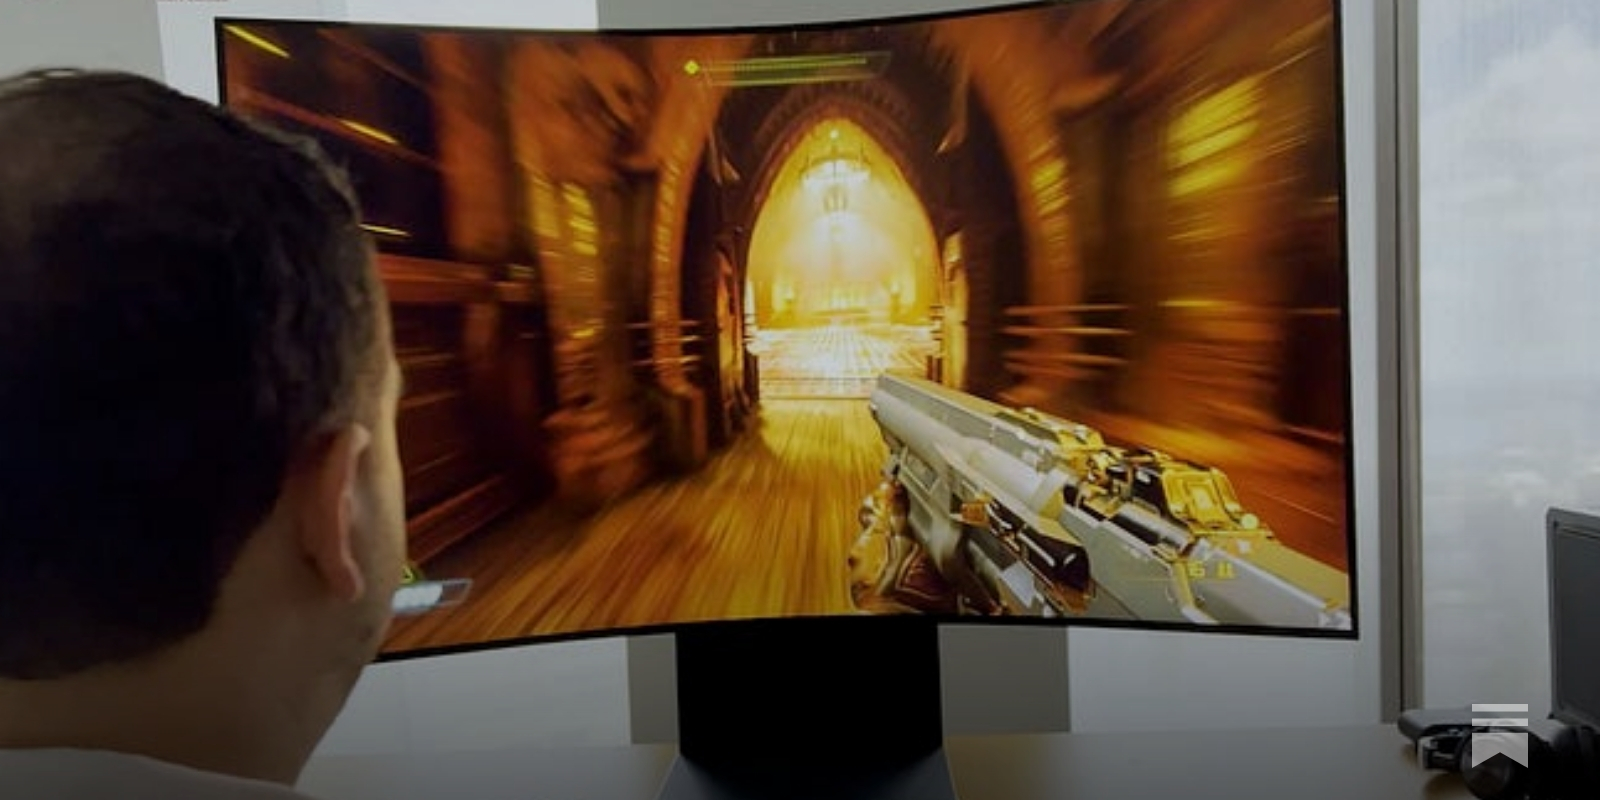 Samsung Odyssey Ark Review: This Massive Monitor Is a Gaming